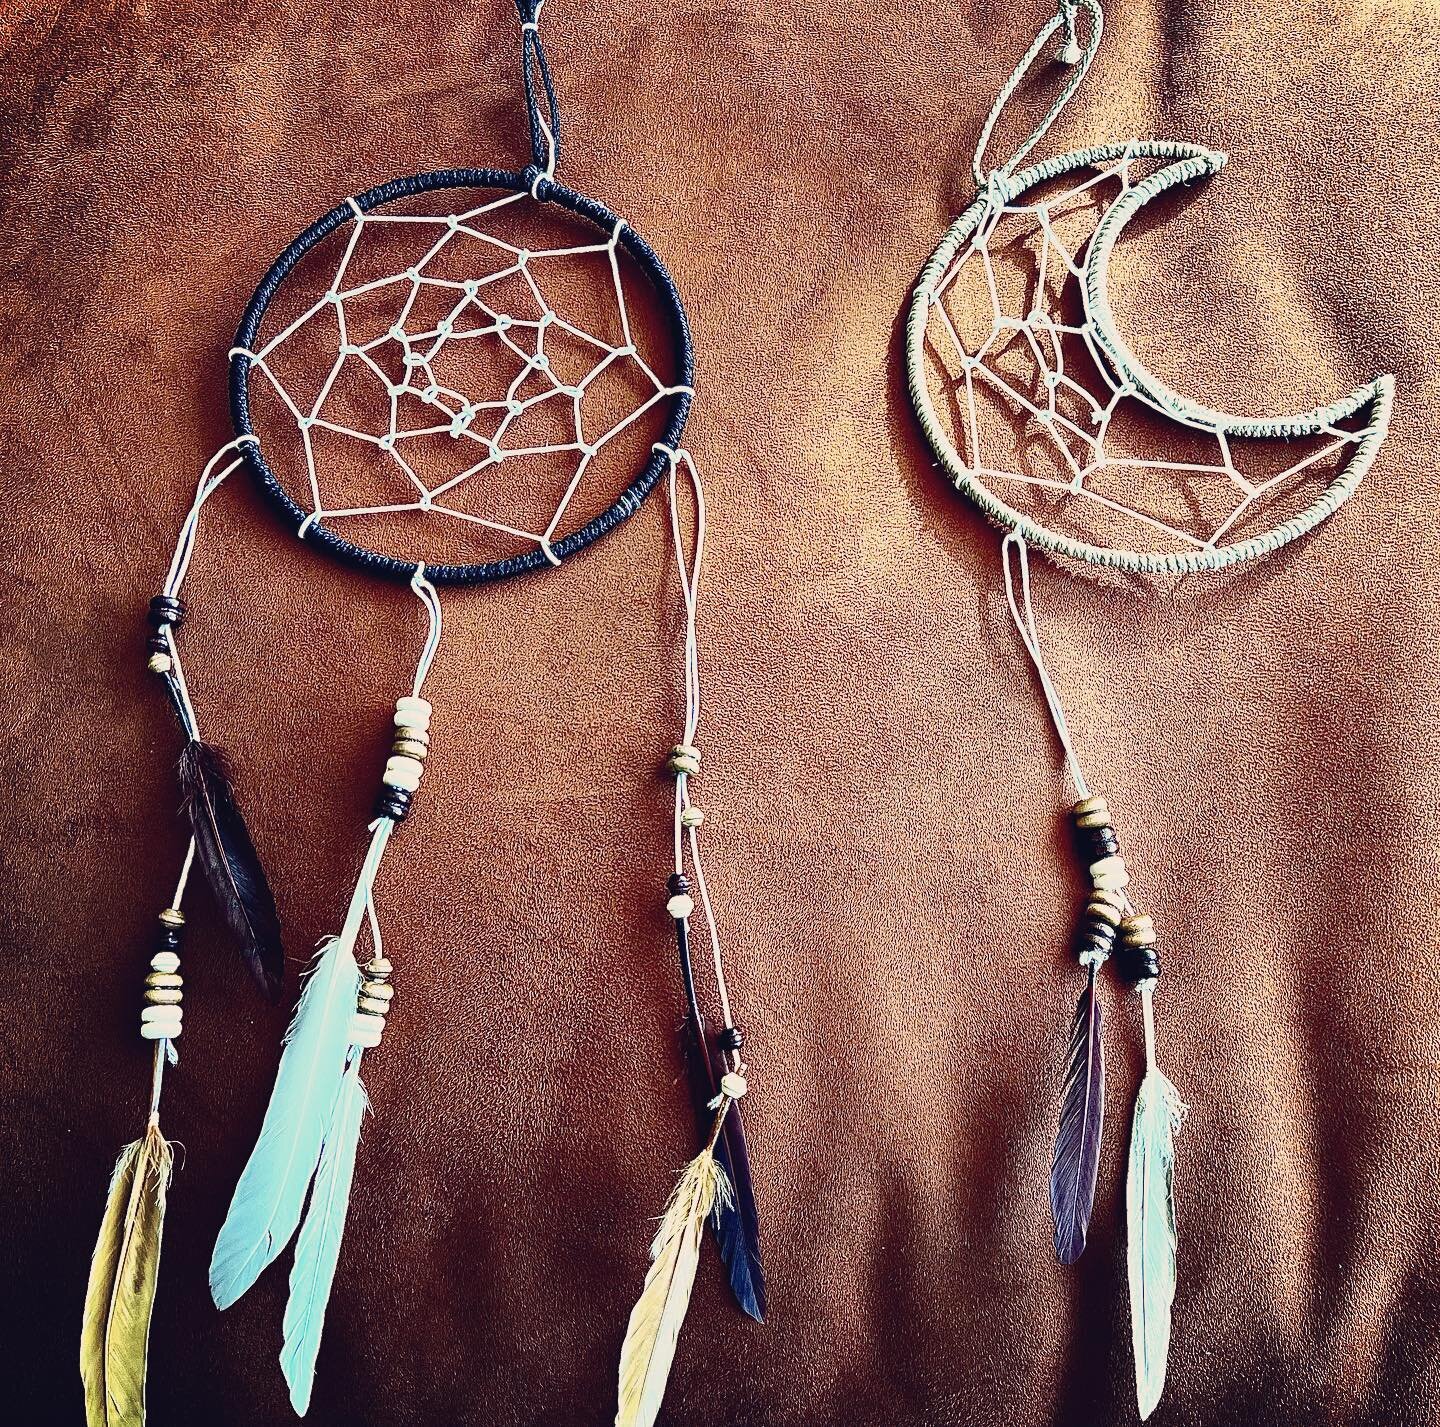 Dream Catchers by artist and Art Workshop facilitator Rekina Perry.
Celebrating Native American Heritage this month and every day.
The land we occupy and steward, the culture we acknowledge and honor.
#survivorsleadtheway 
#artheals
#artliberation